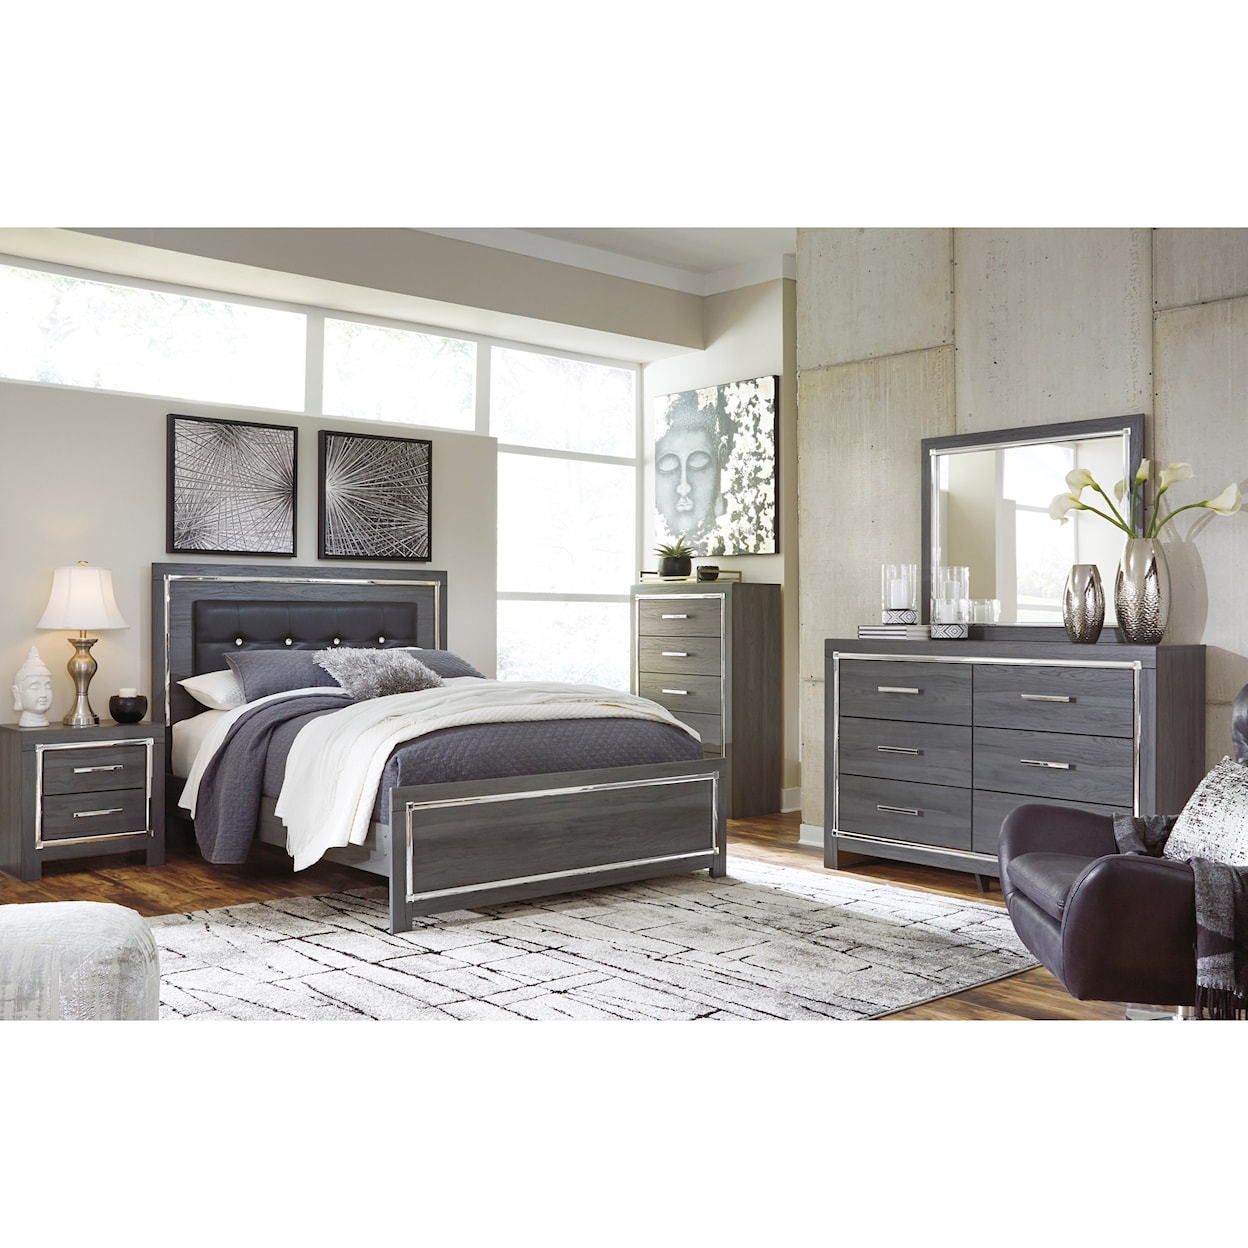 Signature Design by Ashley Furniture Lodanna King Bedroom Group